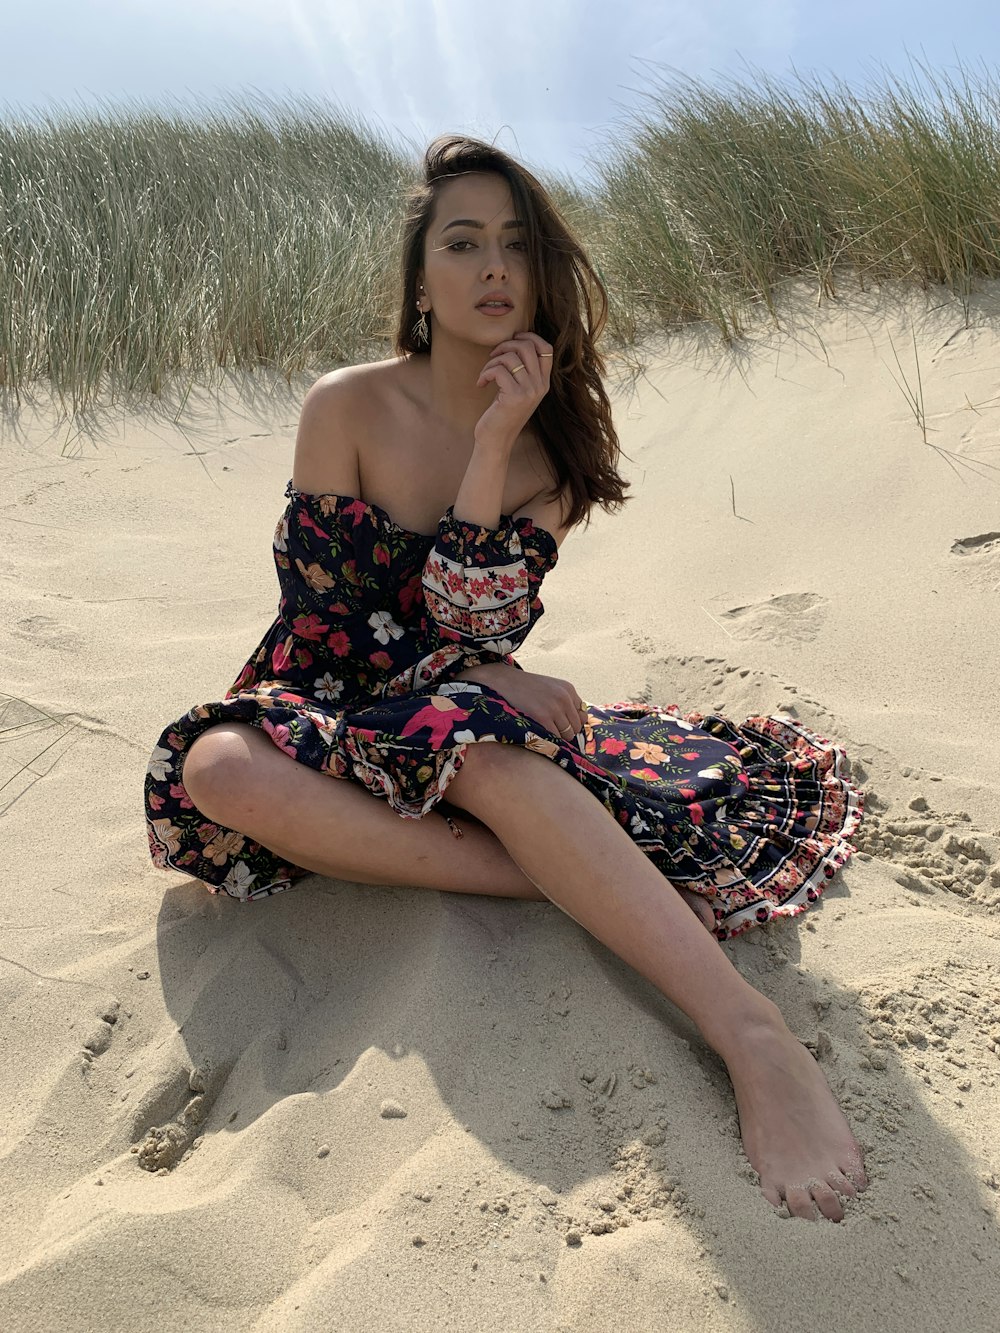 woman in black, pink, and white floral dress sitting on sand